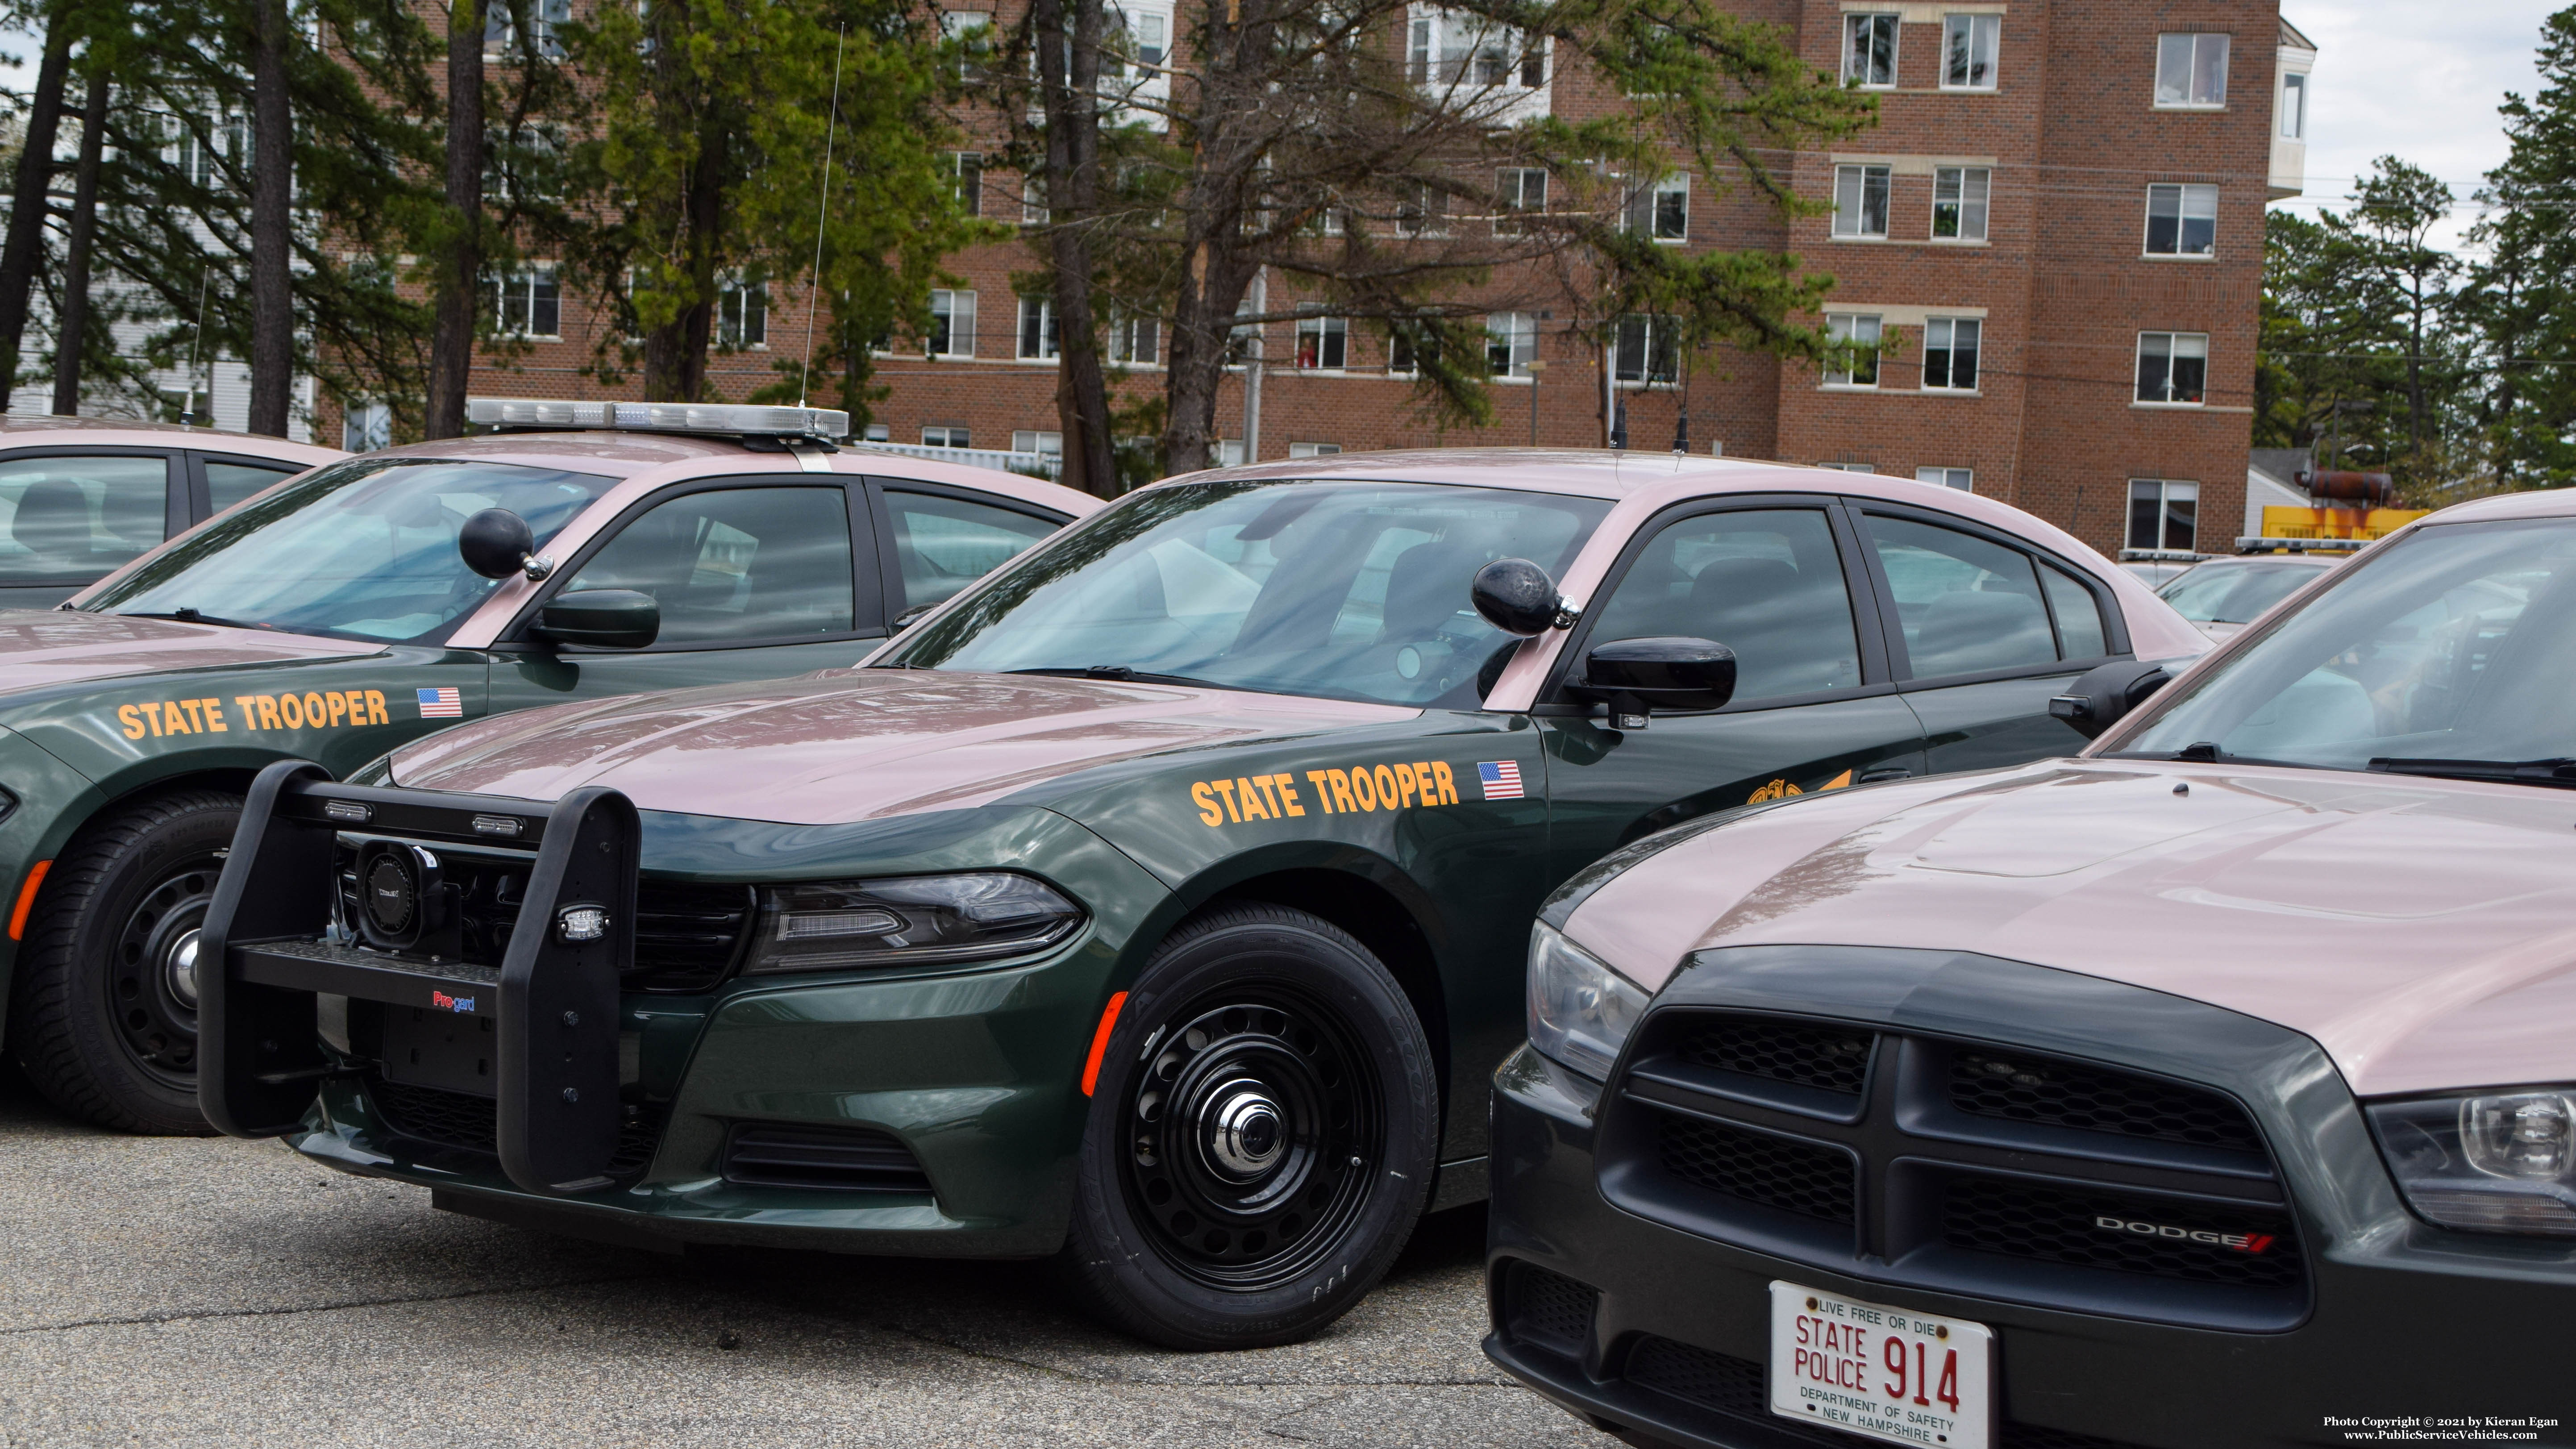 A photo  of New Hampshire State Police
            Cruiser 429, a 2020 Dodge Charger             taken by Kieran Egan